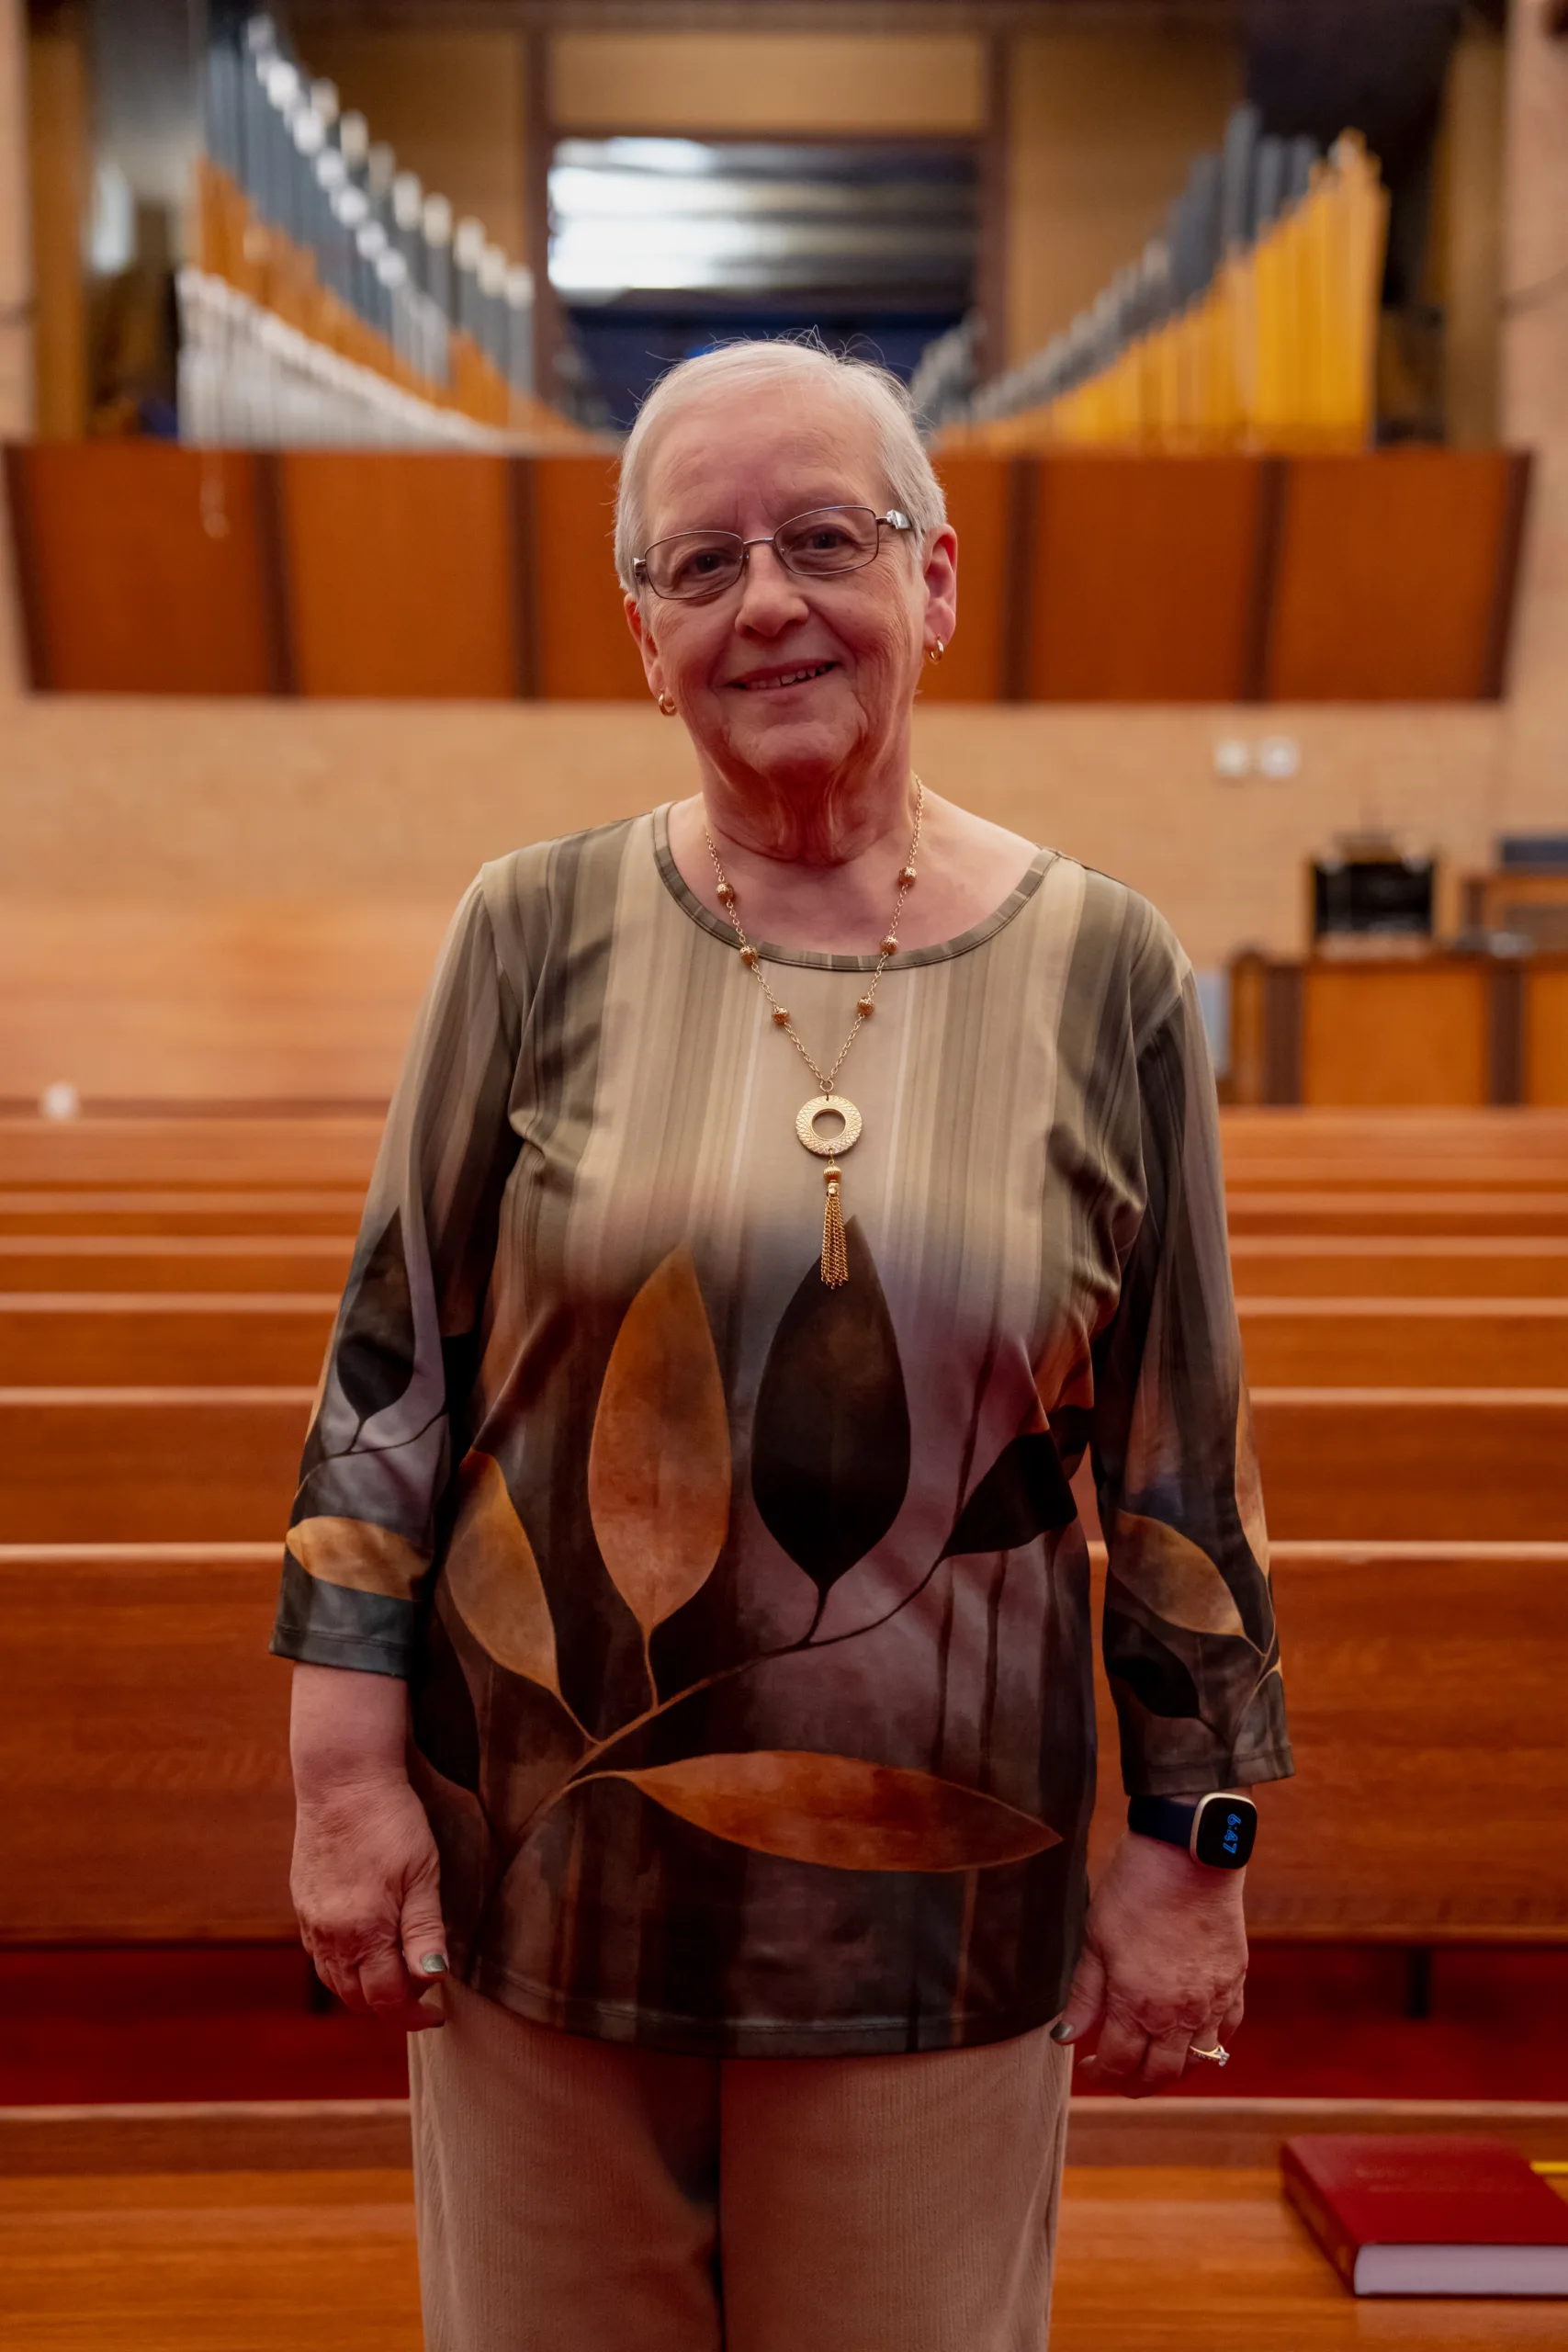 Penny is the organist and secretary at University Church. She is seen here in our Kent, Ohio campus sancutary.